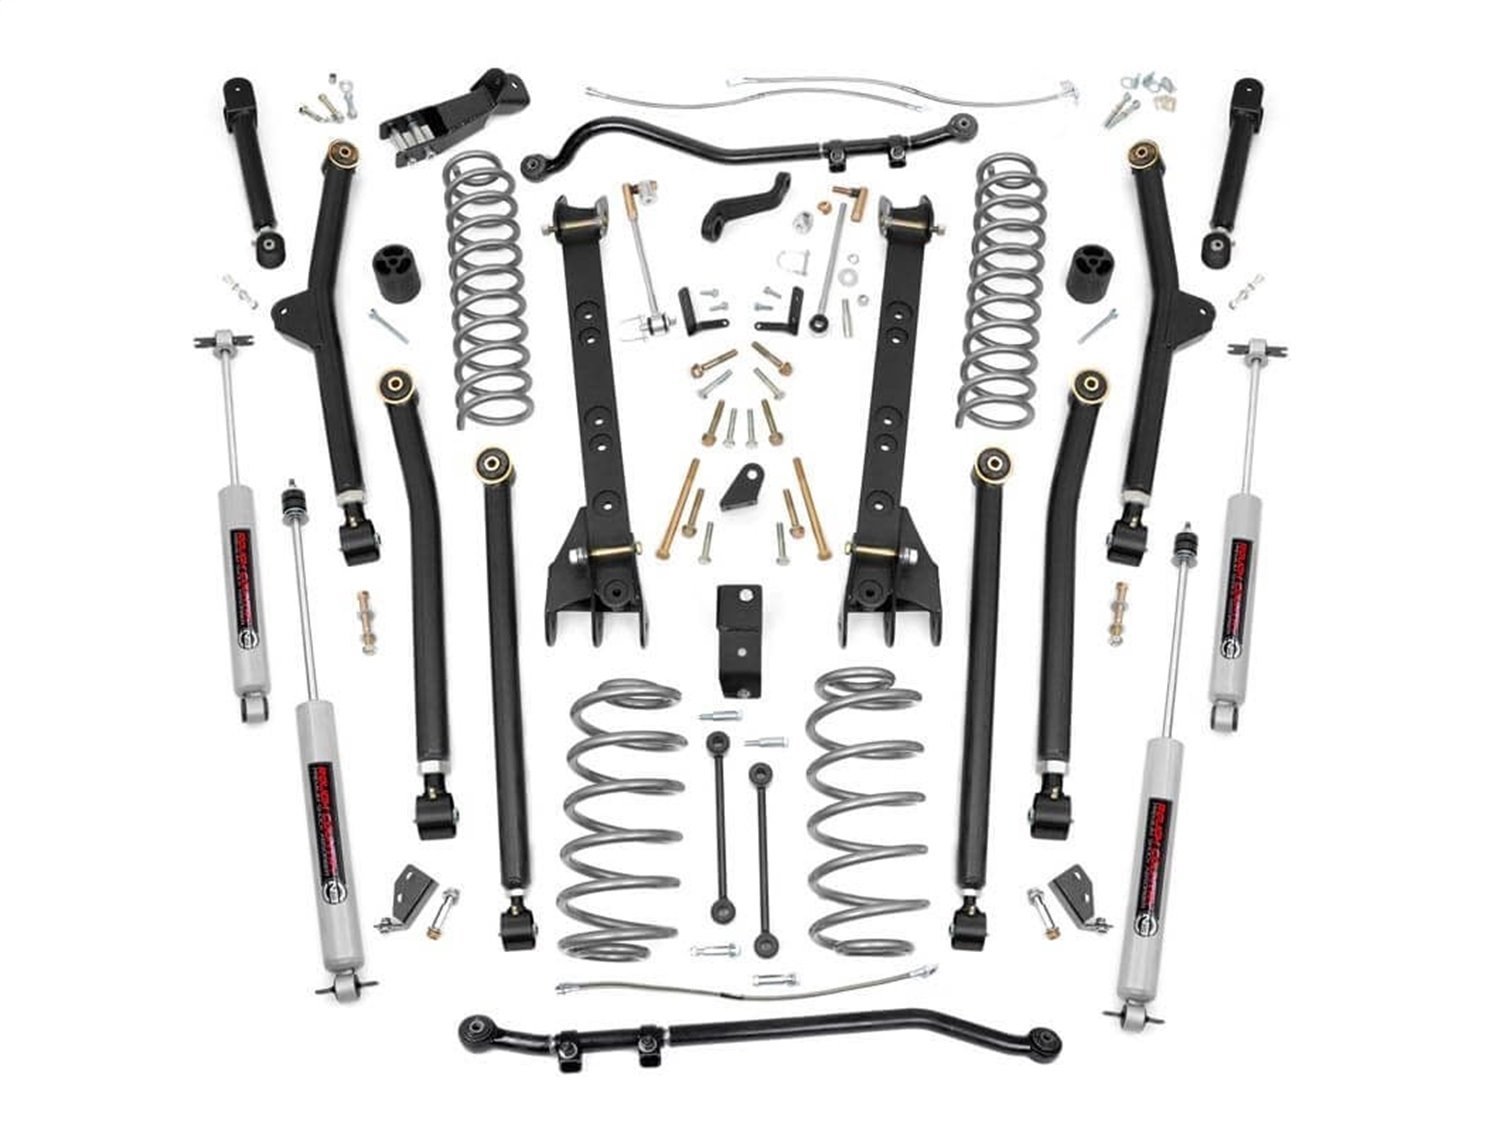 65922 6-inch X-Series Long Arm Suspension Lift System